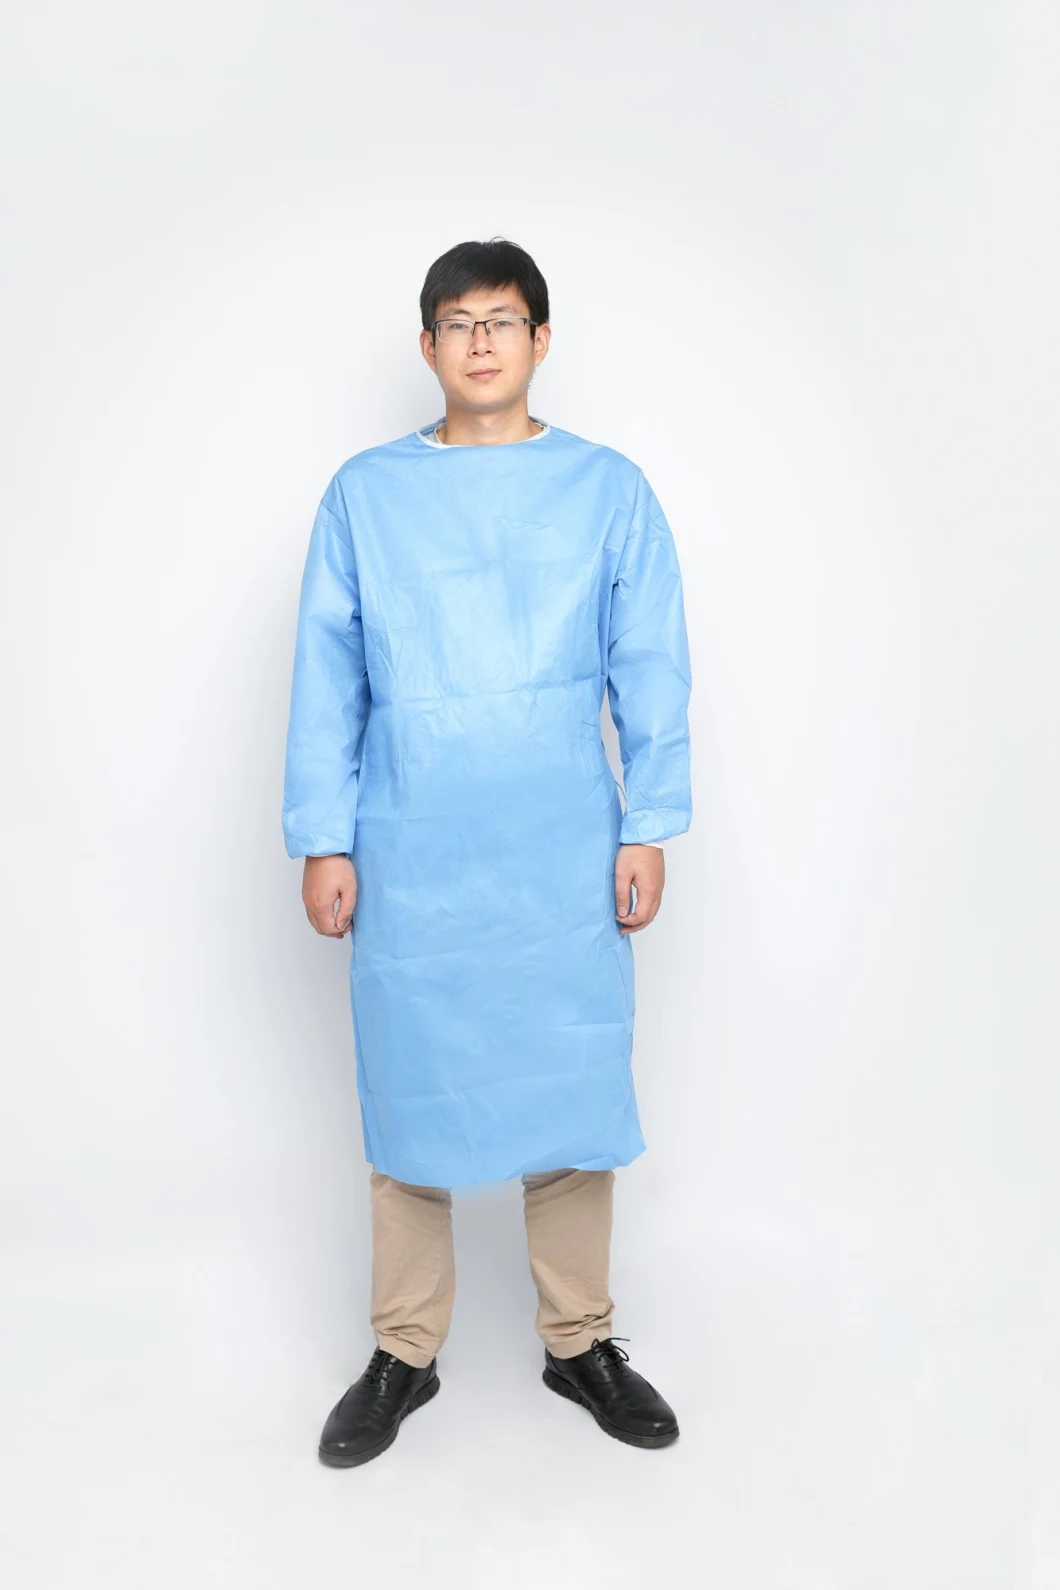 Sterilized Surgical Gown Level 3 with Coating SMS Hospital Use CE Certificate with Ultrasonic Sealing